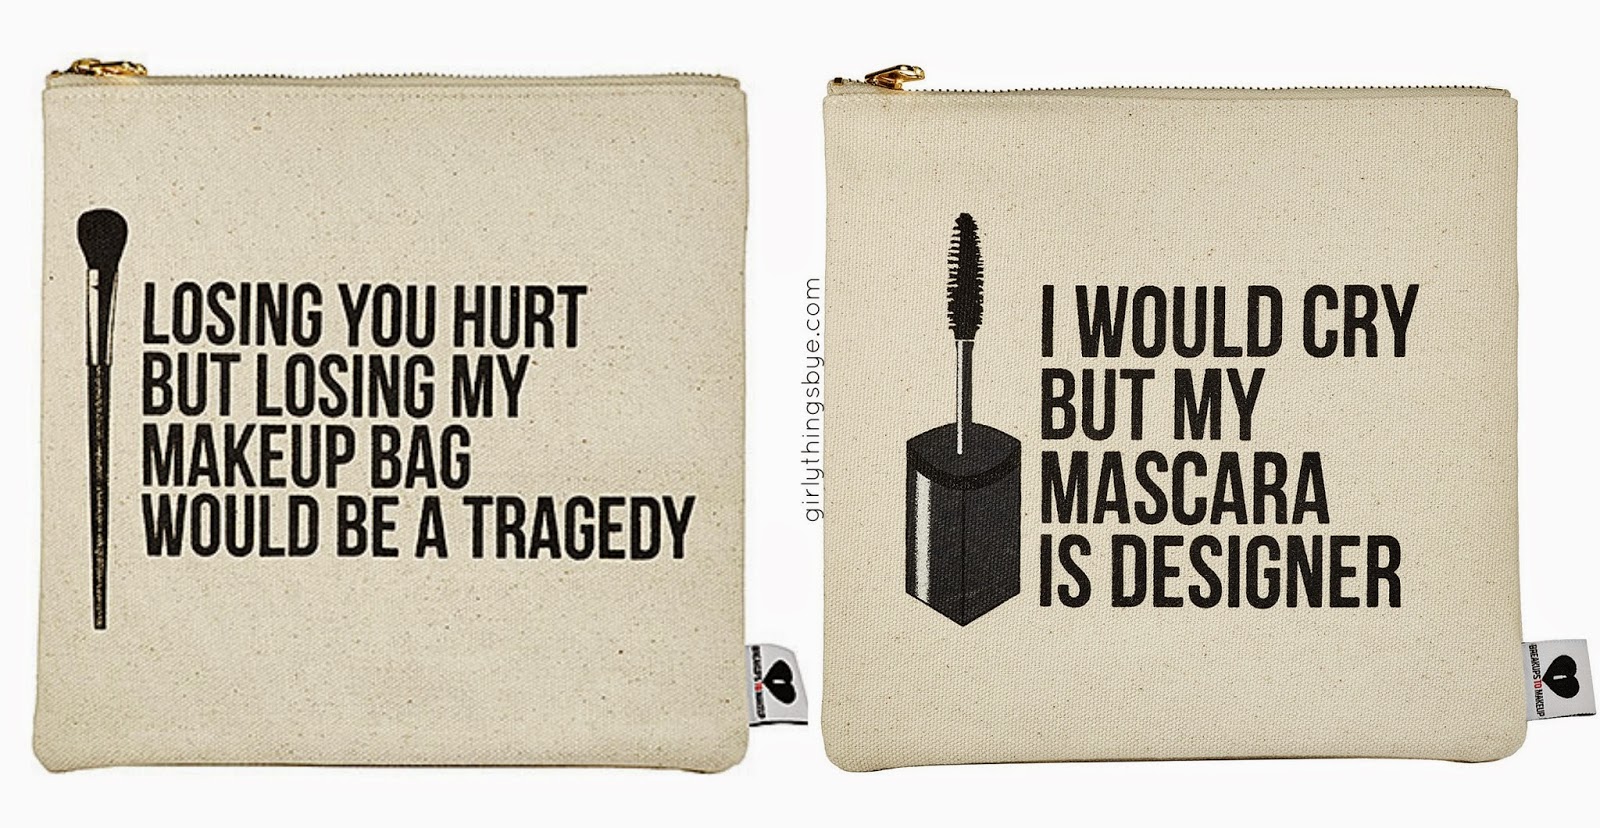 Breakups to Makeup makeup clutches available at Sephora